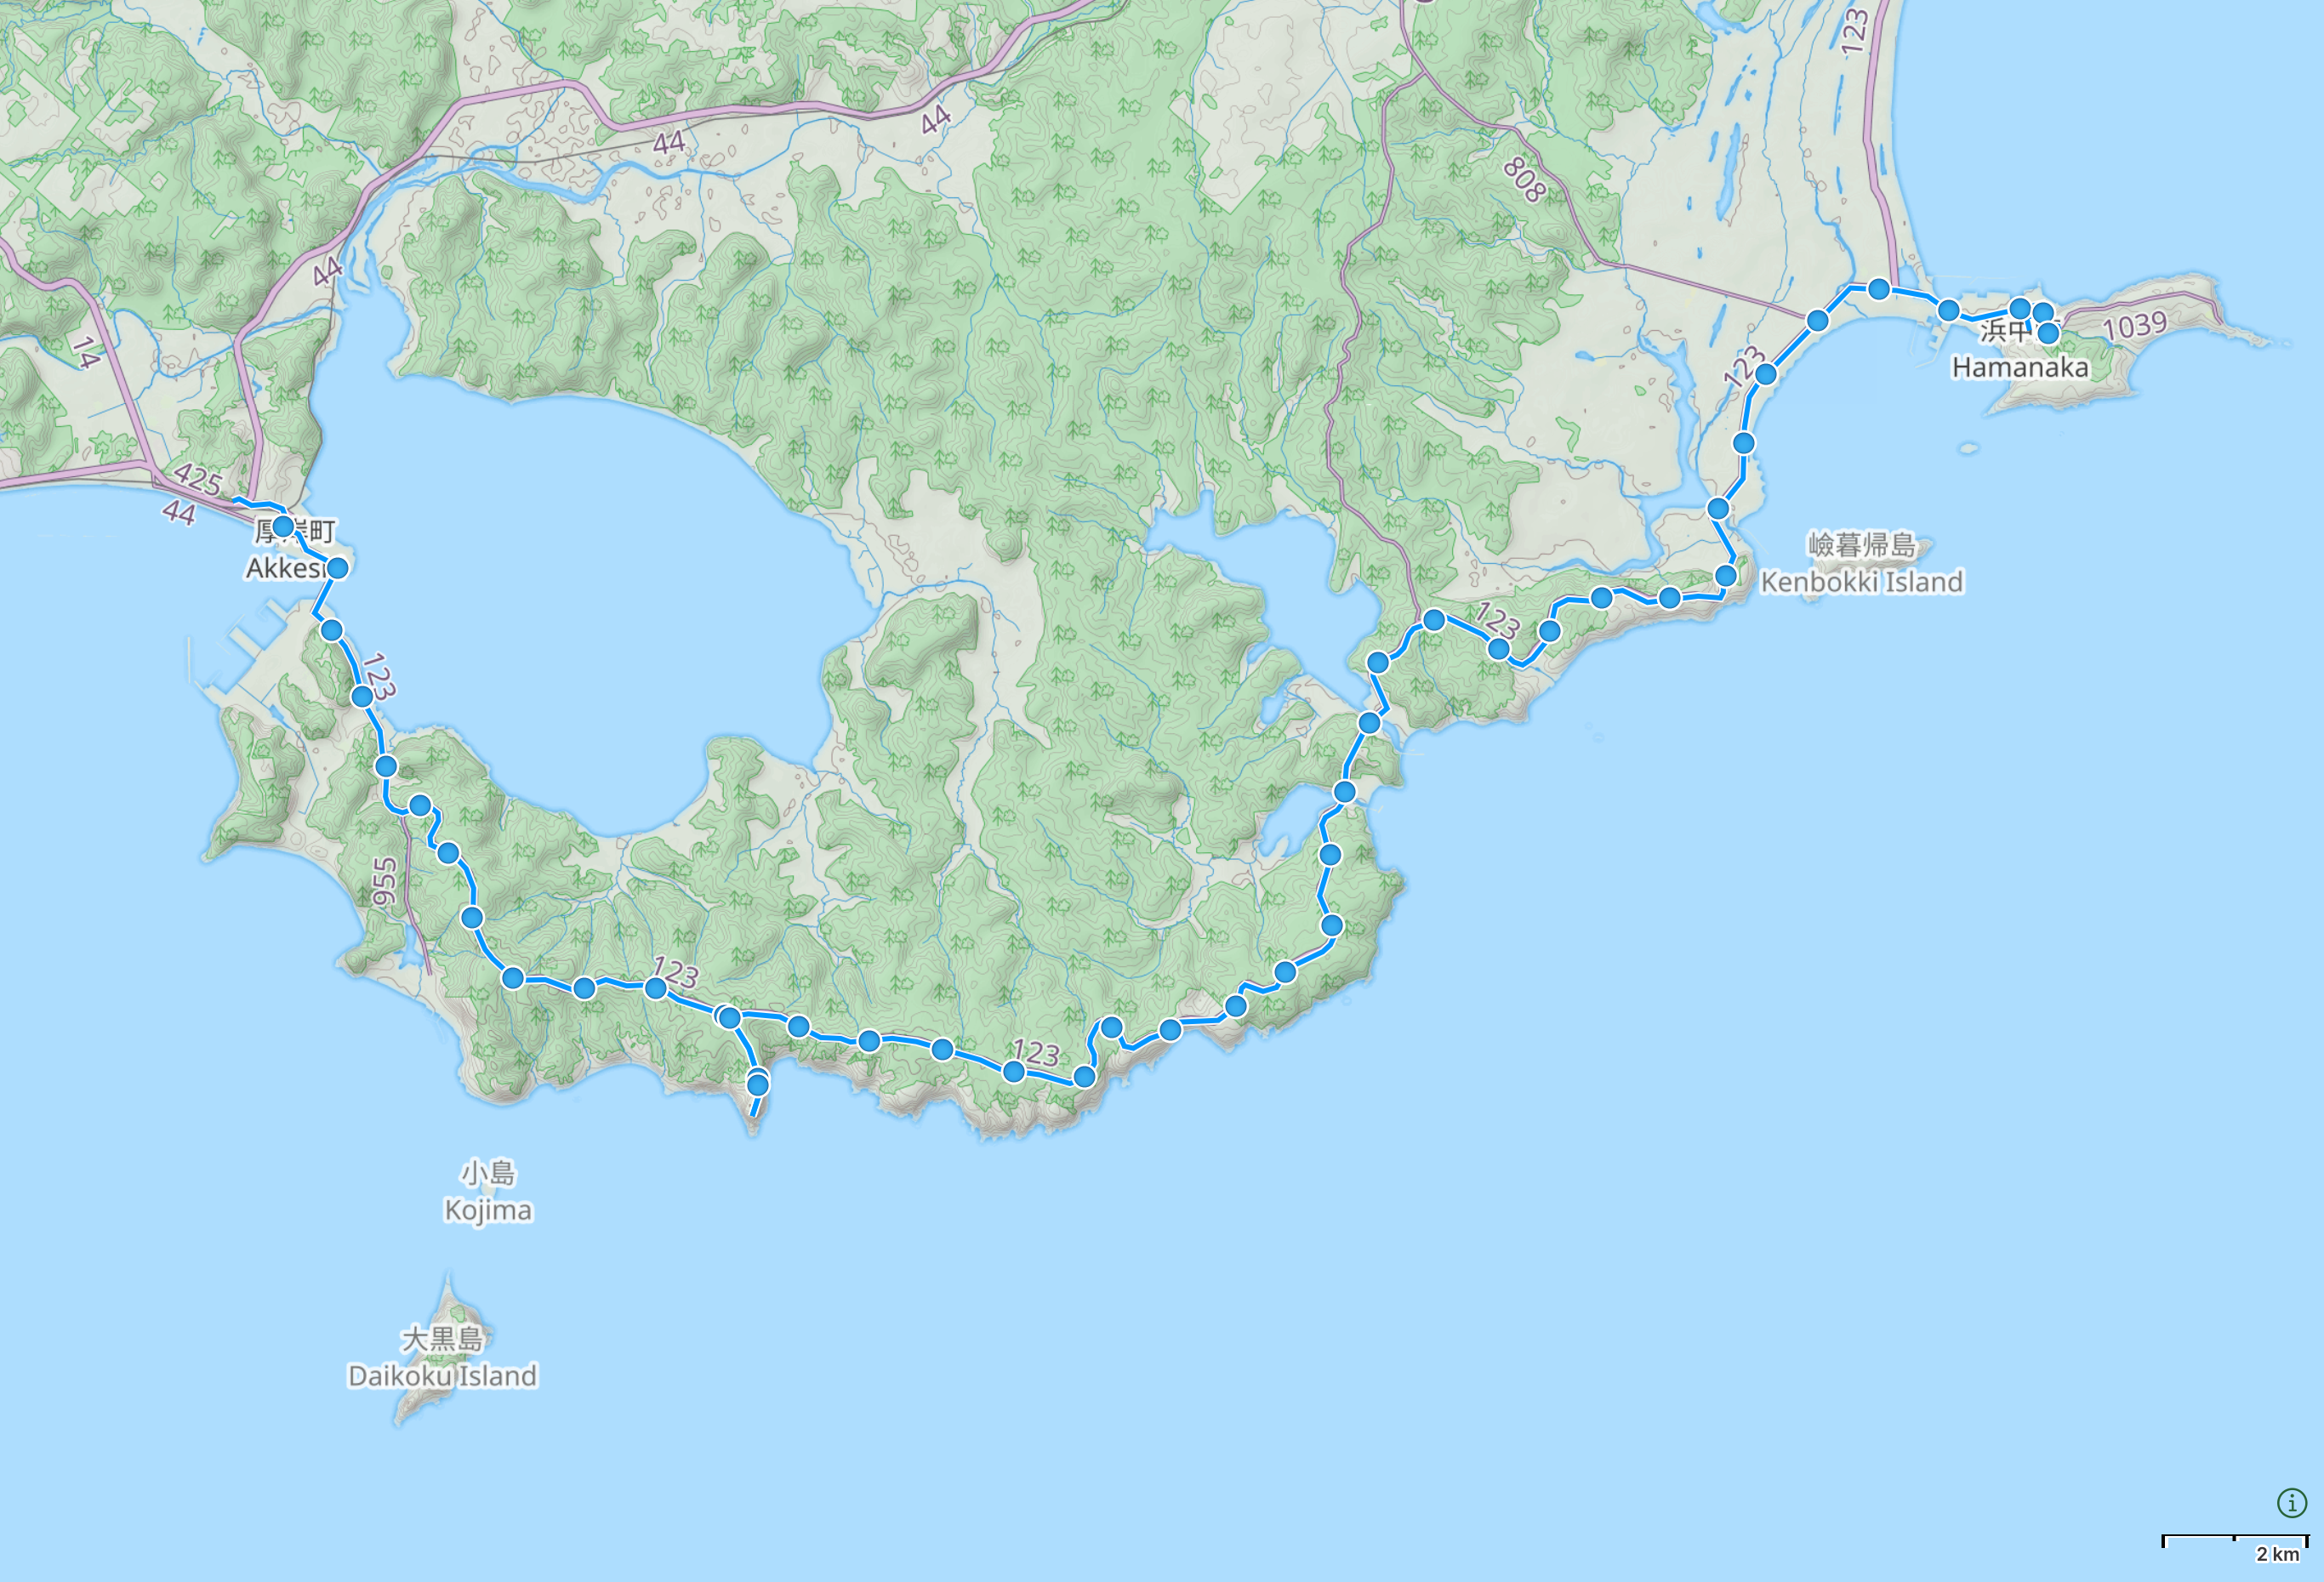 Map of Hokkaido with author’s route from Akkeshi to Hamanaka highlighted.